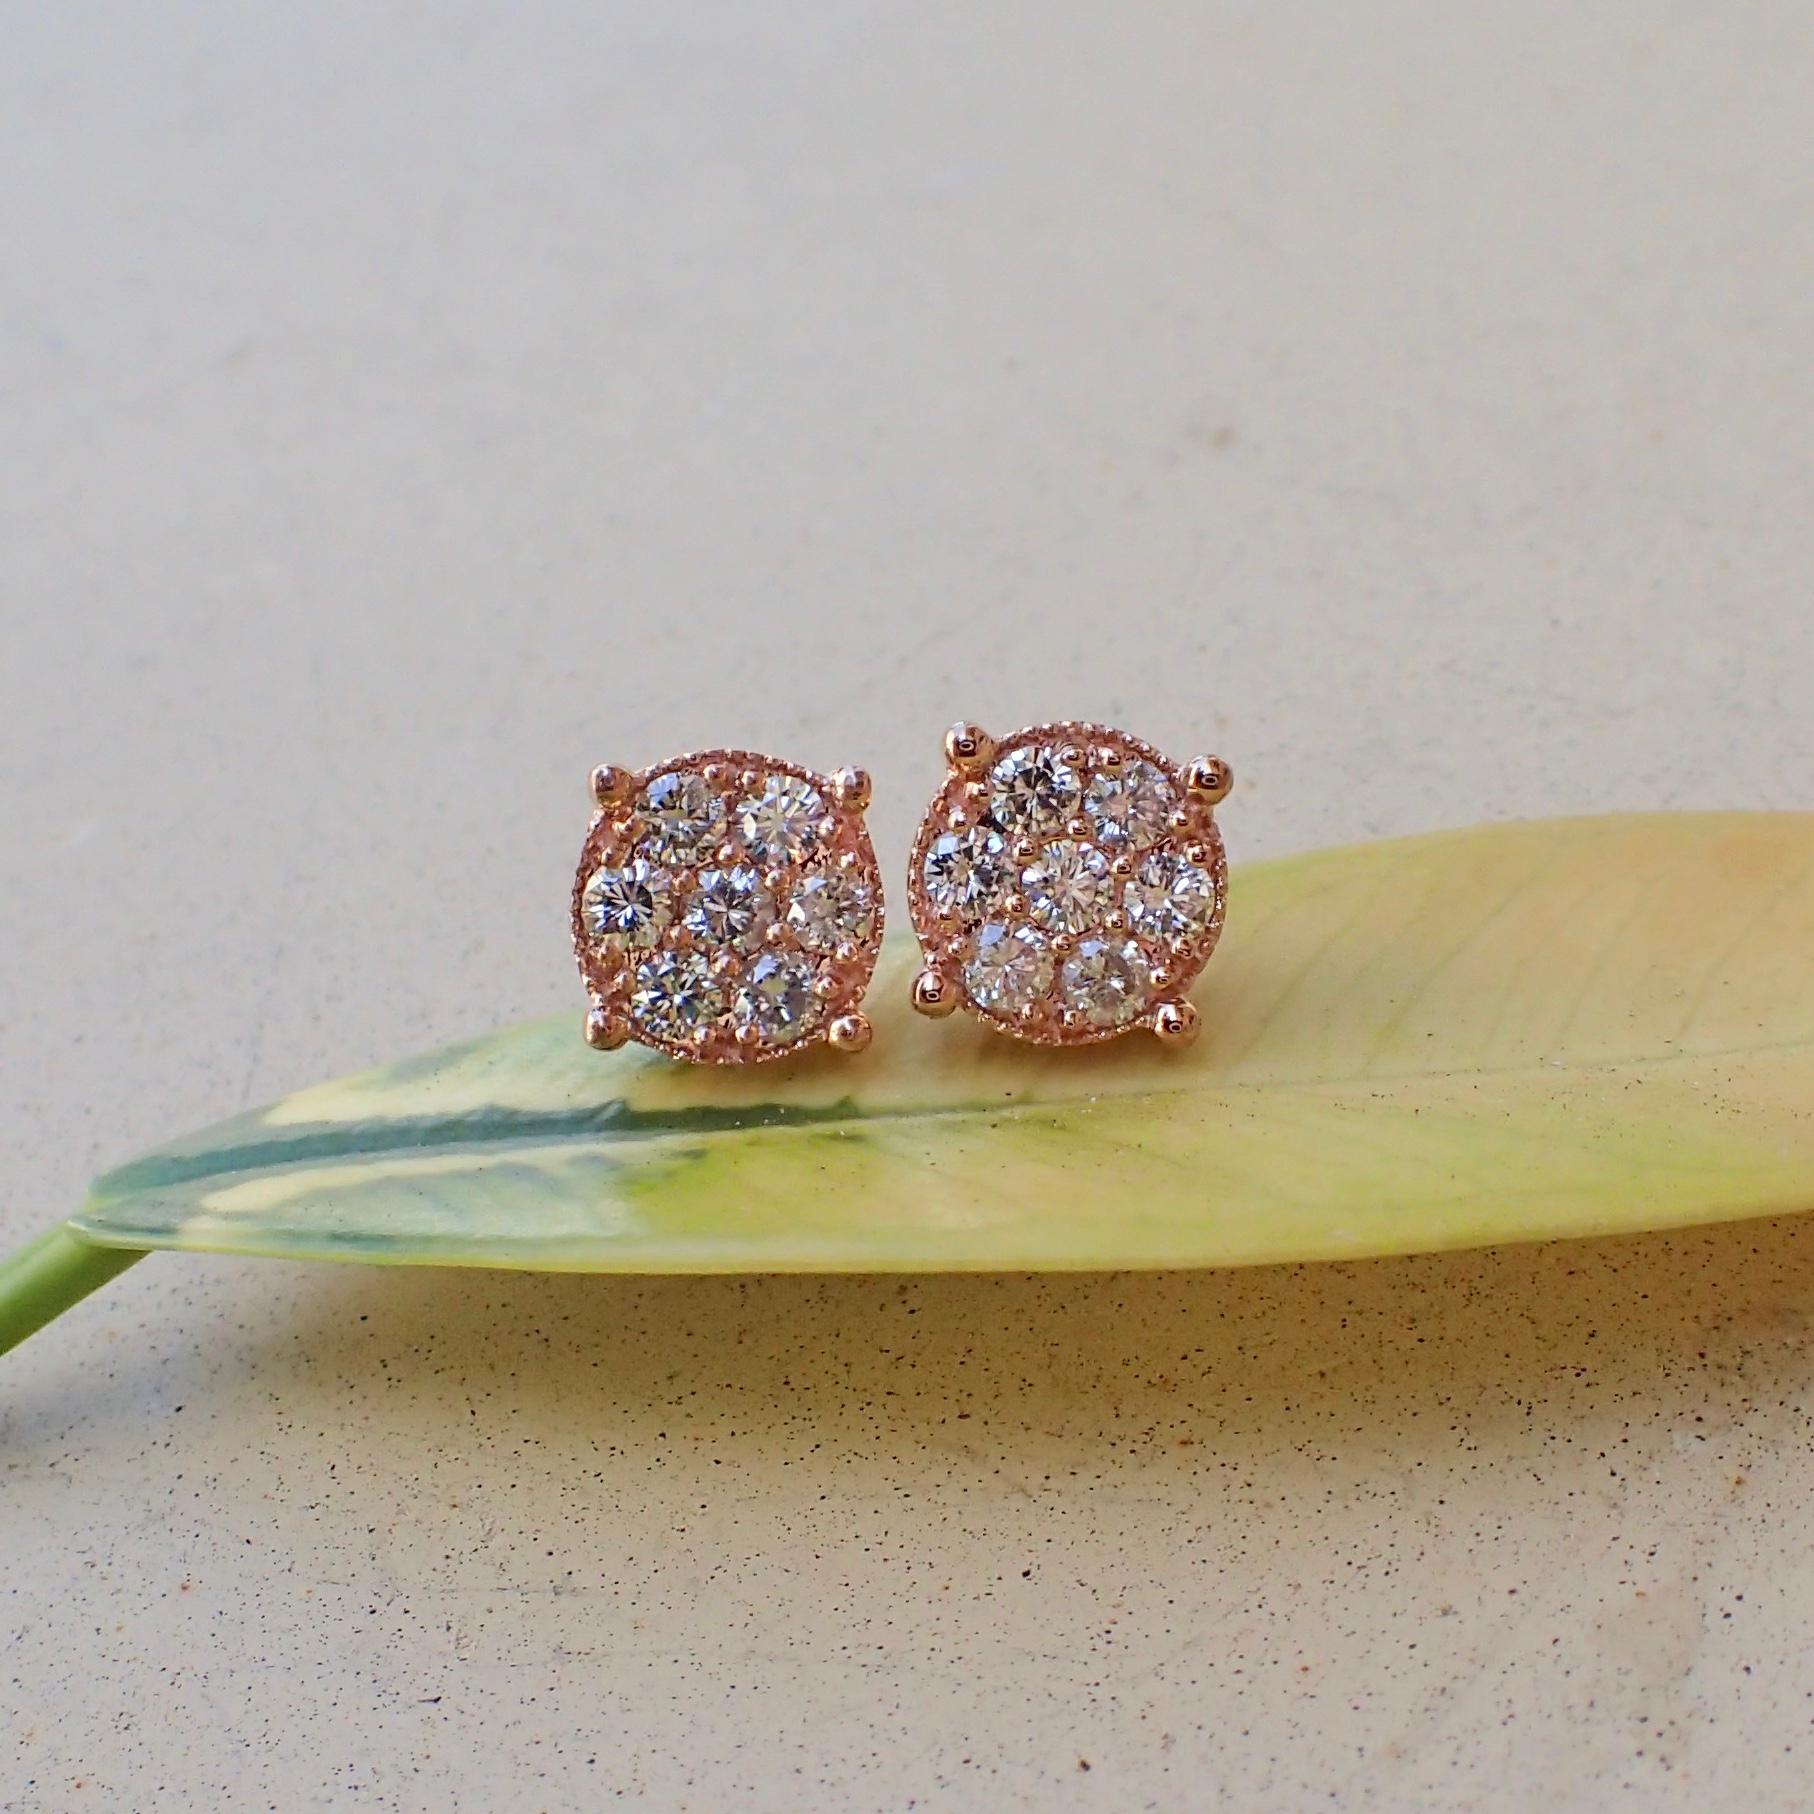 A pair of 14k rose gold earrings are prong set with two (2) Round Brilliant Cut diamonds measuring 2.6mm x 2.6mm that weigh a total of 0.14 carats with Cold Grade H and Clarity Grade VS-SI and surrounding the center stones are twelve (12) prong set